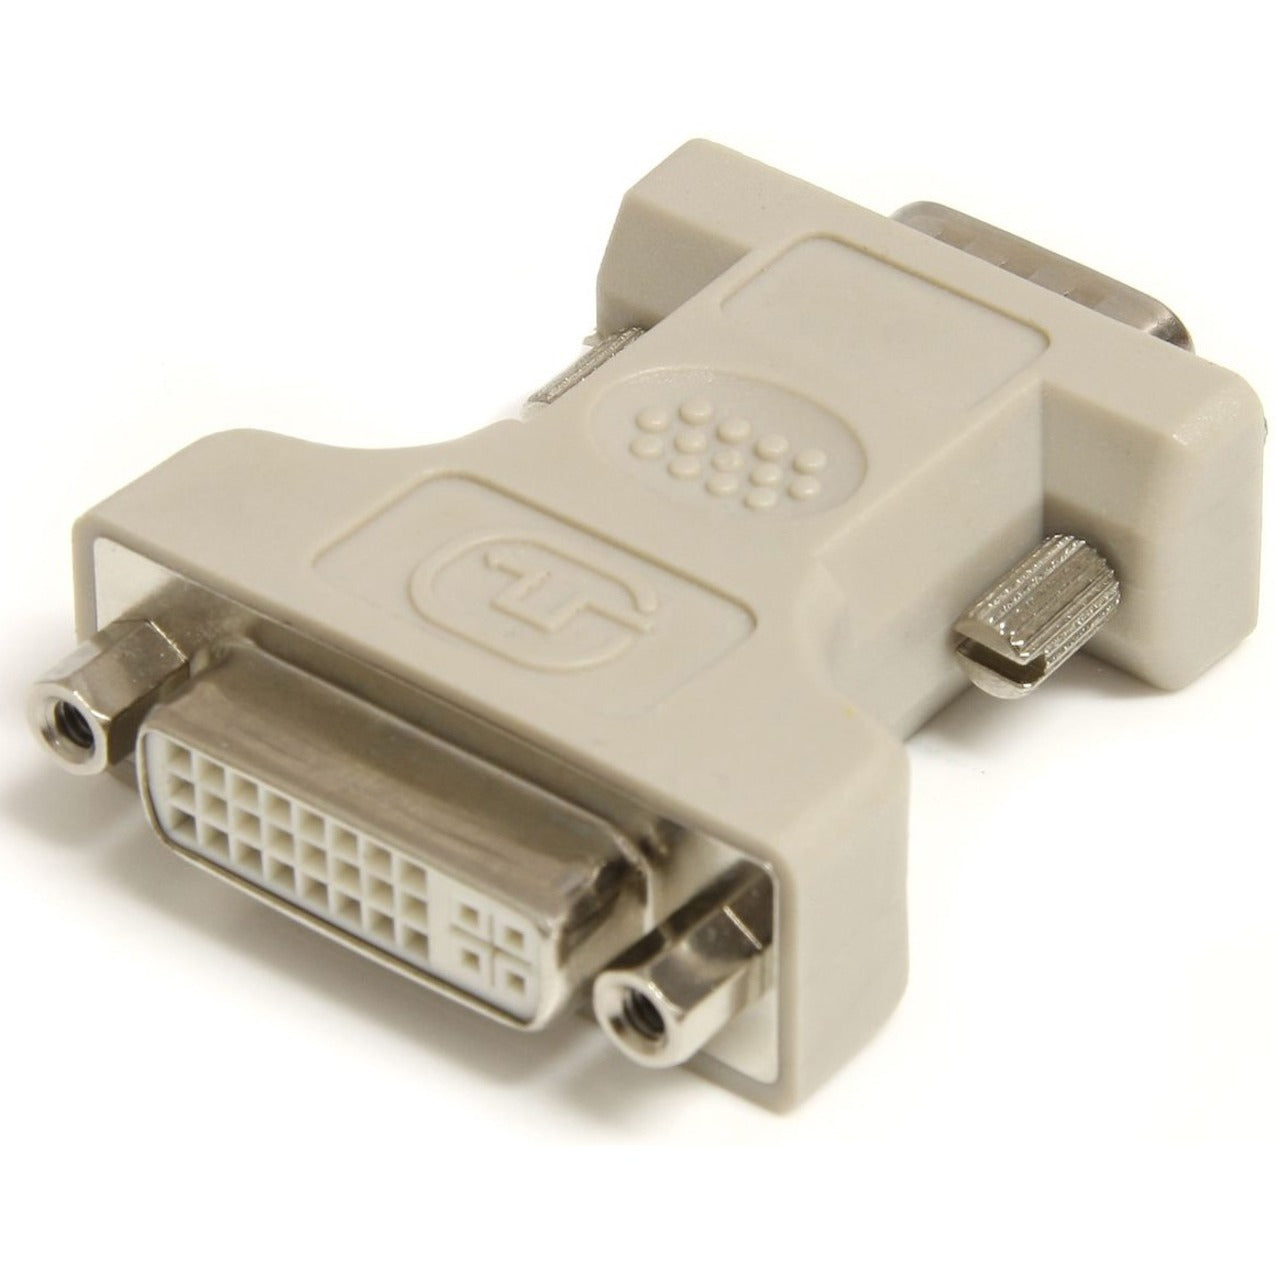 StarTech.com DVIVGAFM DVI to VGA Cable Adapter - Beige, Screw Lock, Molded